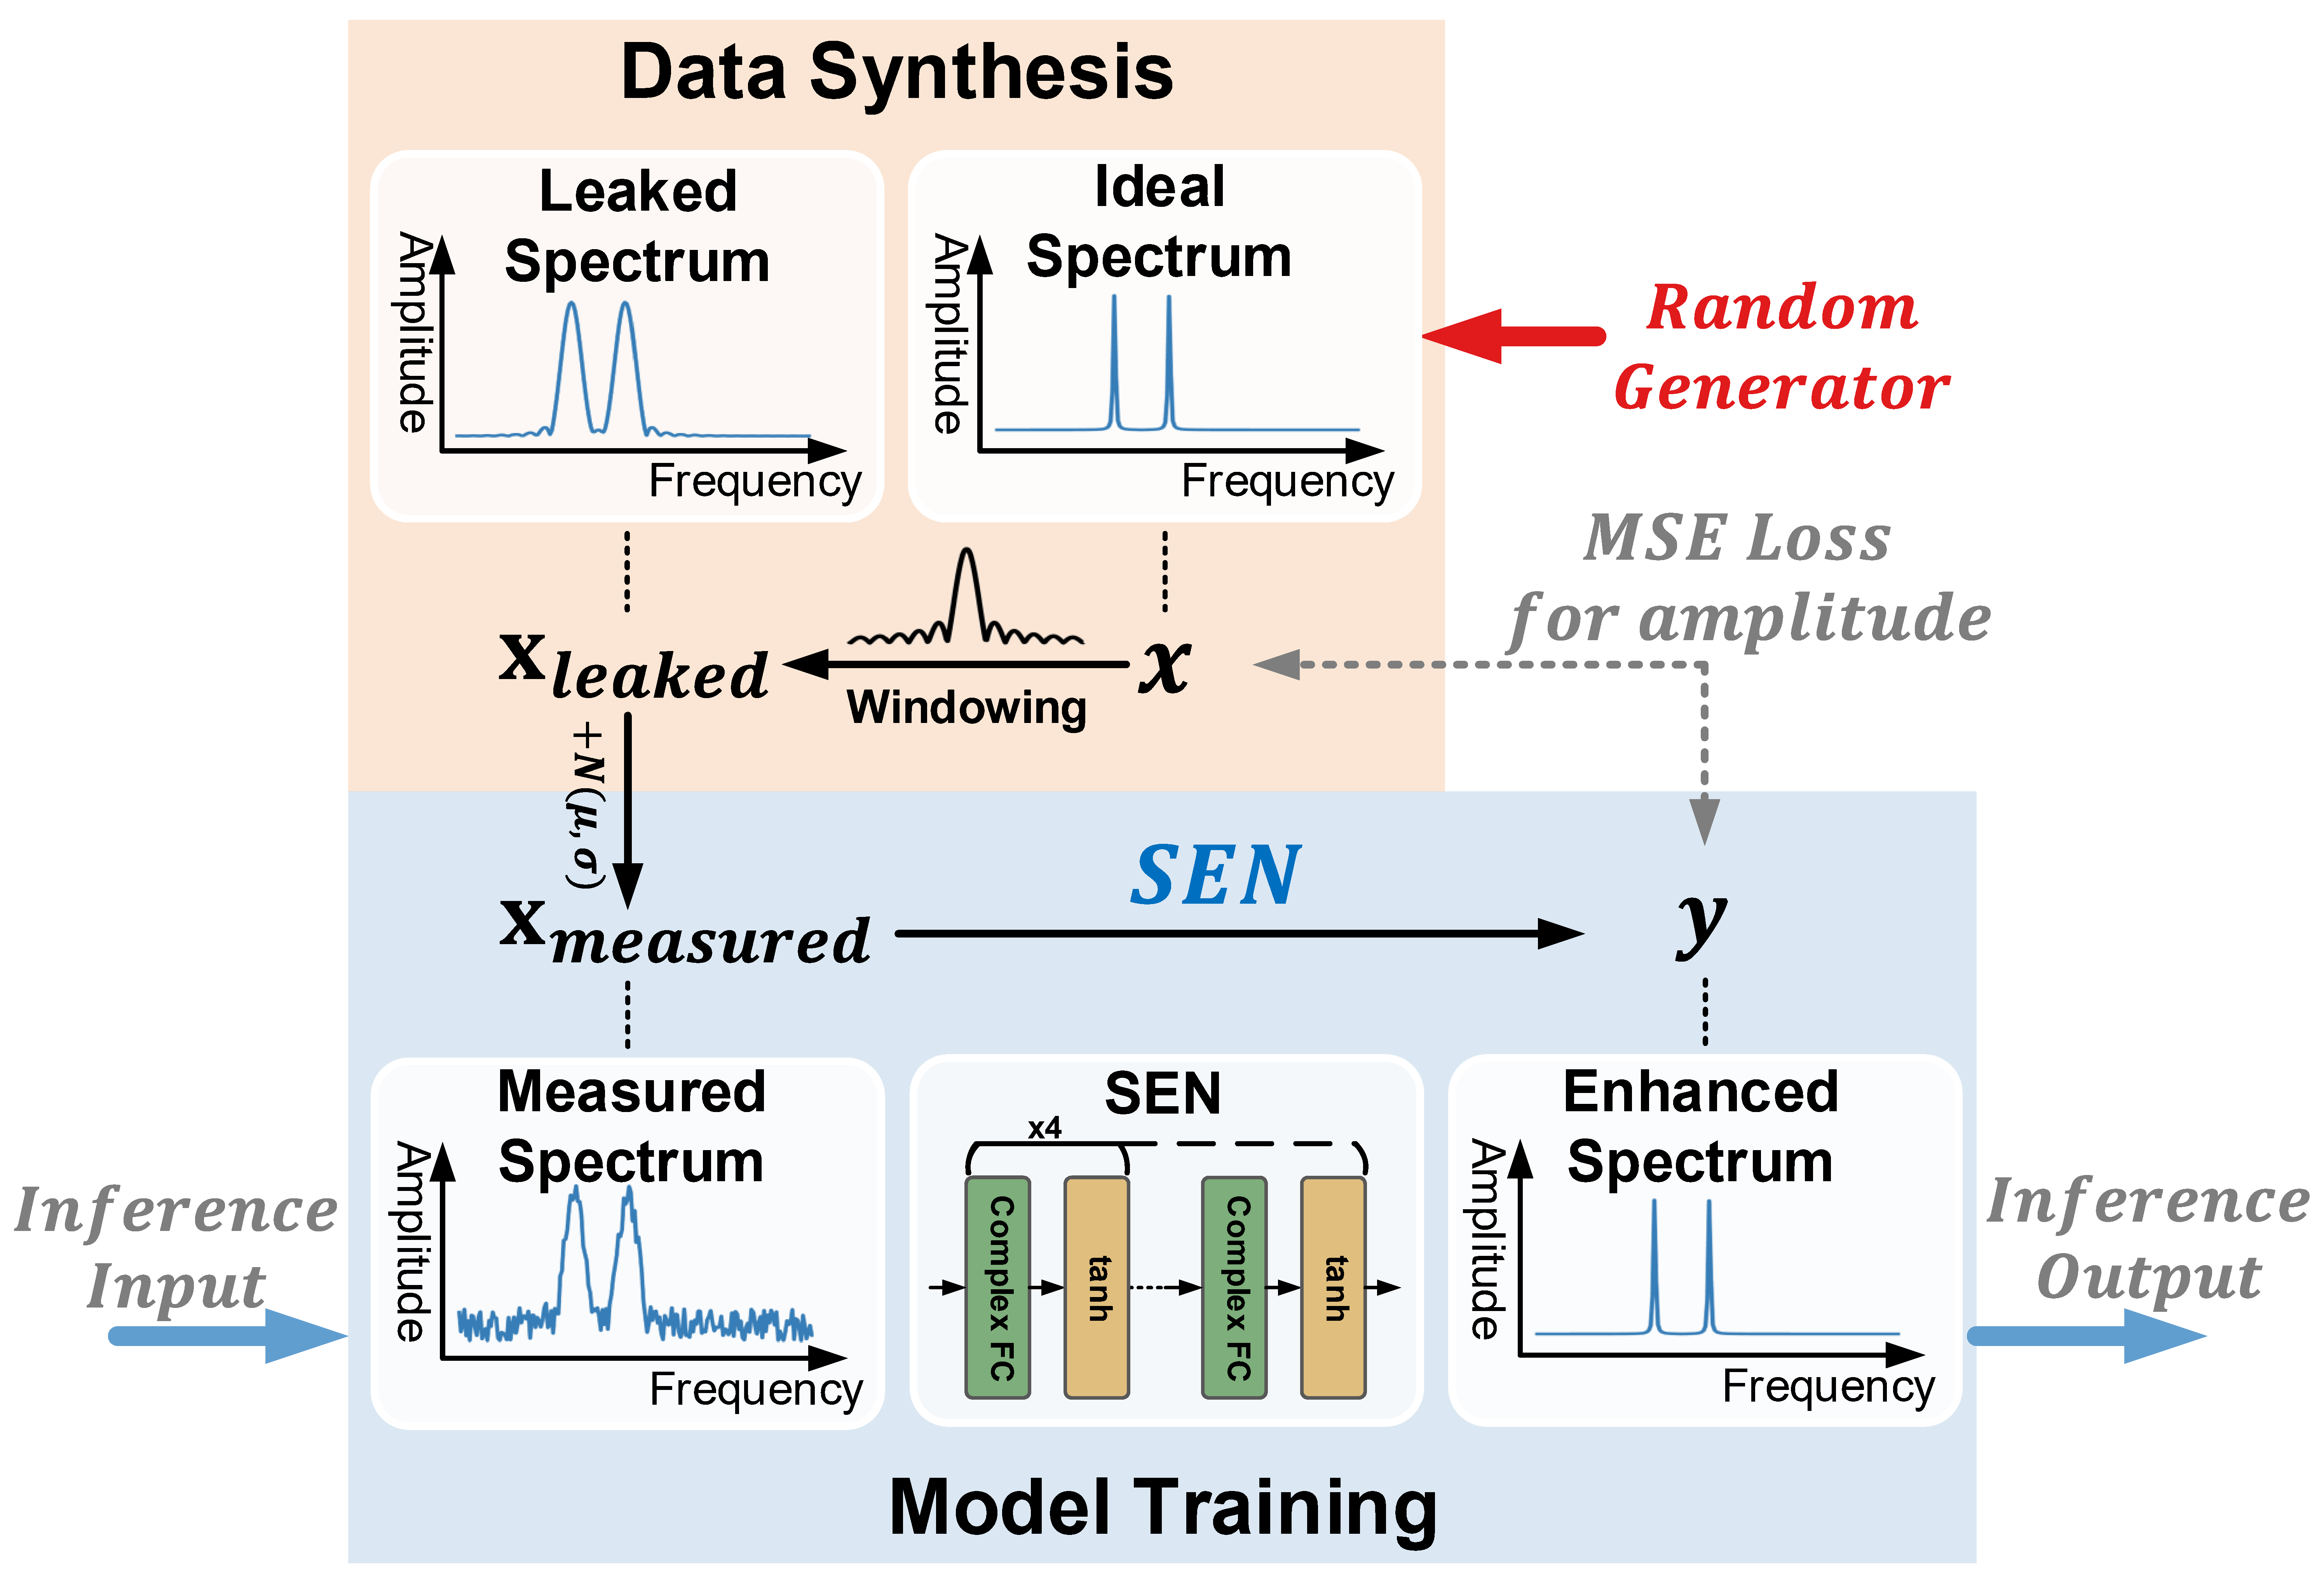 The training process of the signal processing network.